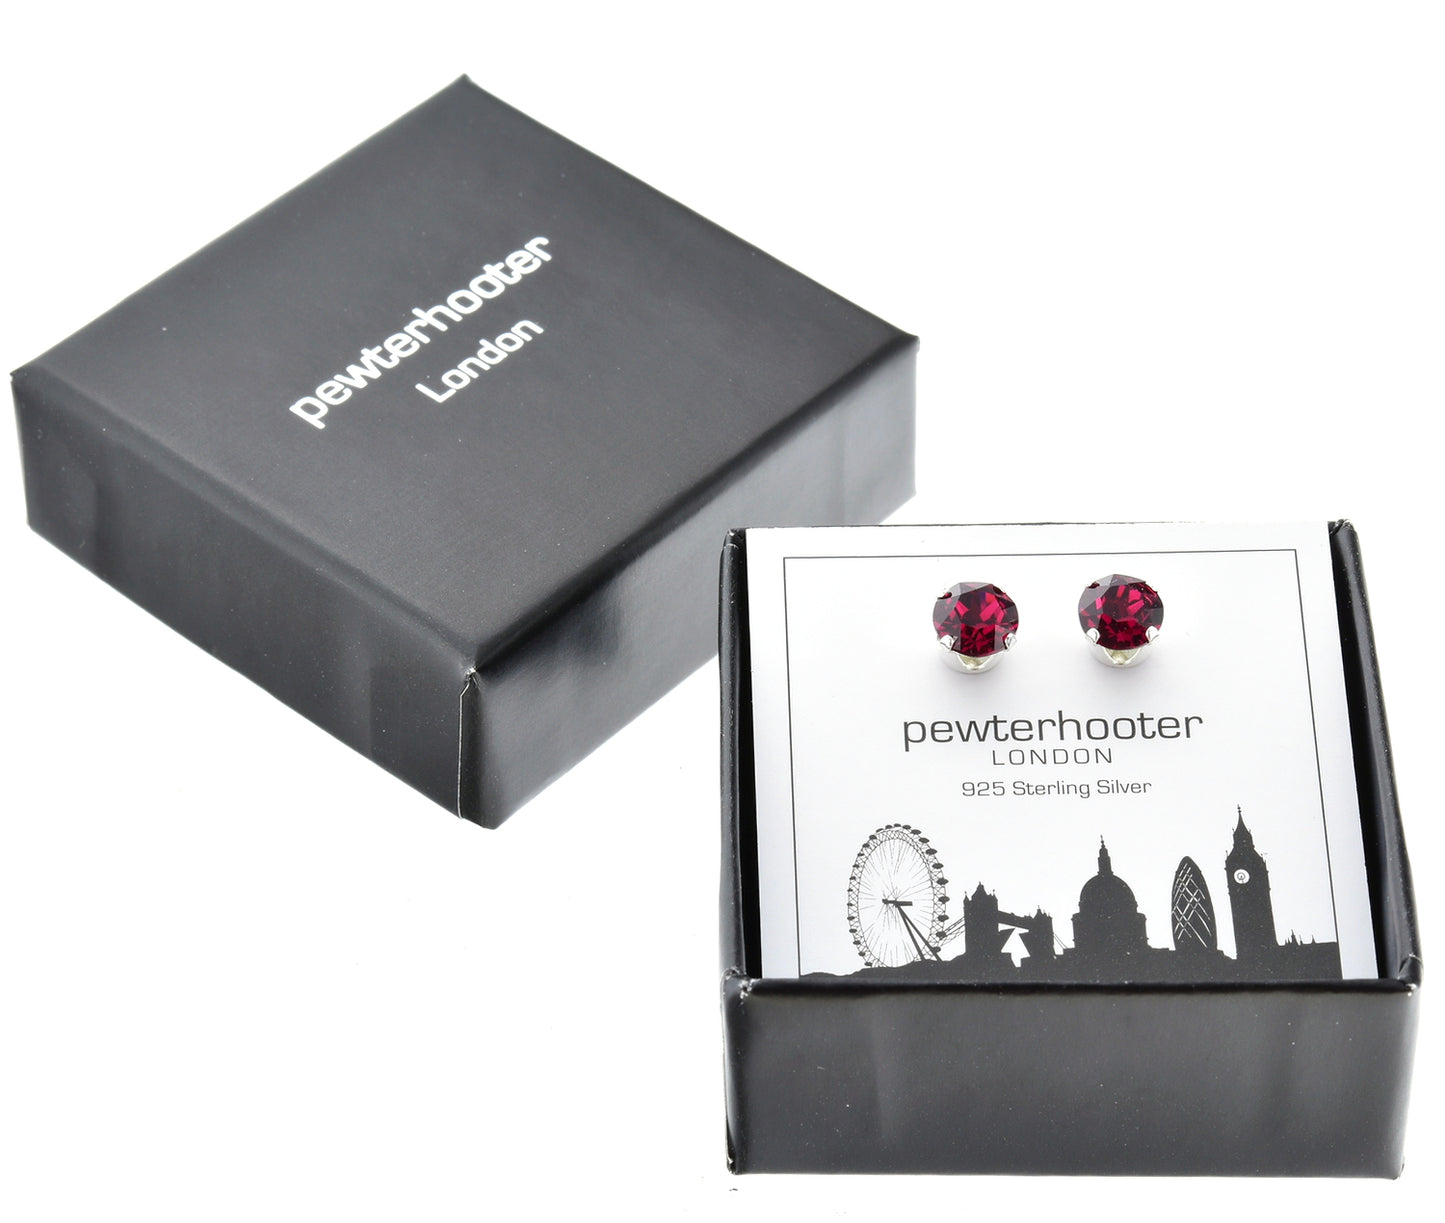 pewterhooter® Women's Classic Collection 925 Sterling silver earrings with sparkling Ruby Red crystals, packaged in a gift box for any occasion.